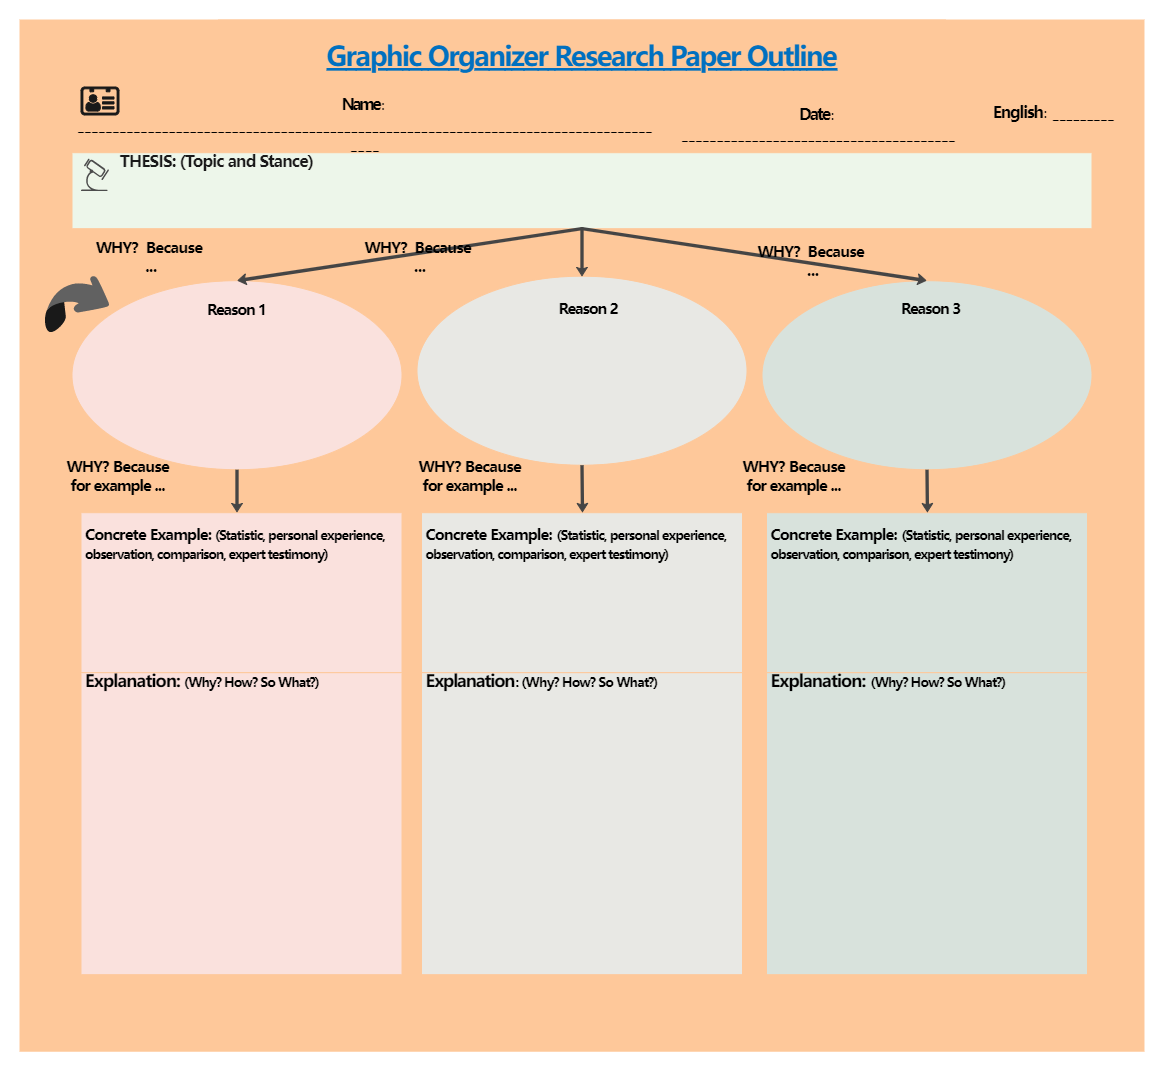 Graphic Organizer Research Paper Outline